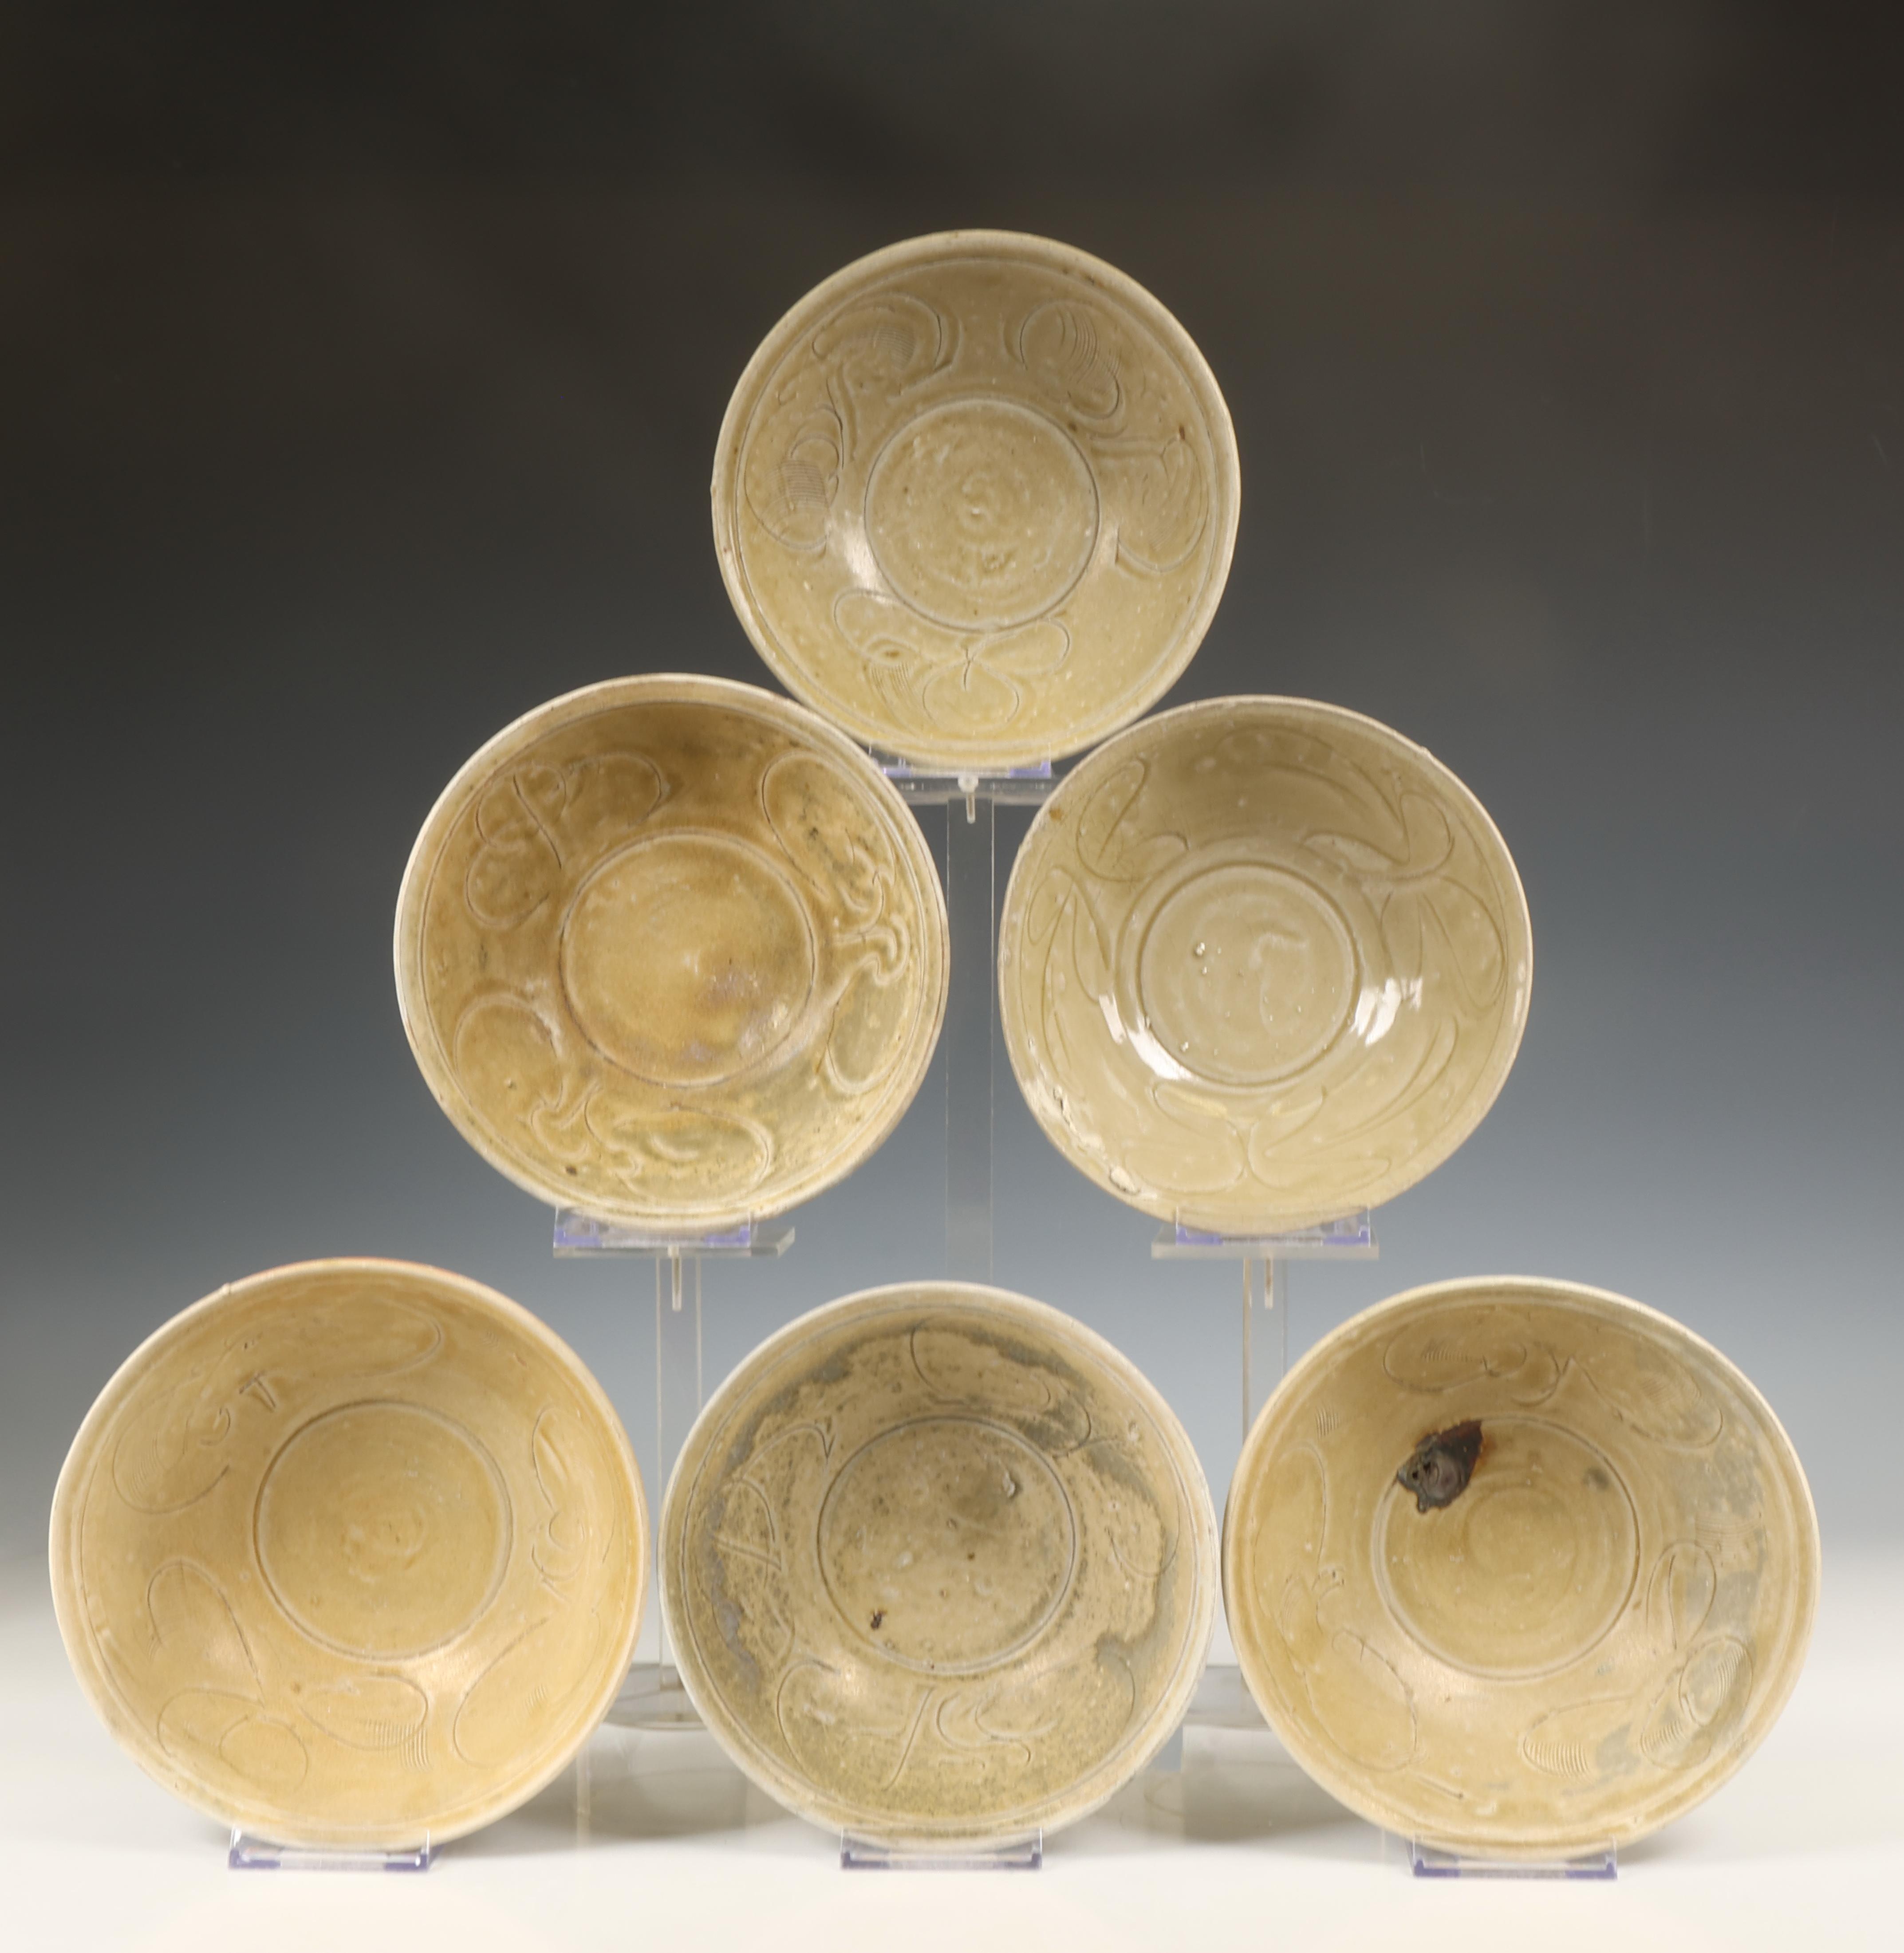 China, collection of eighteen celadon-glazed bowls, Northern Song dynasty, 10th-12th century, - Image 7 of 7